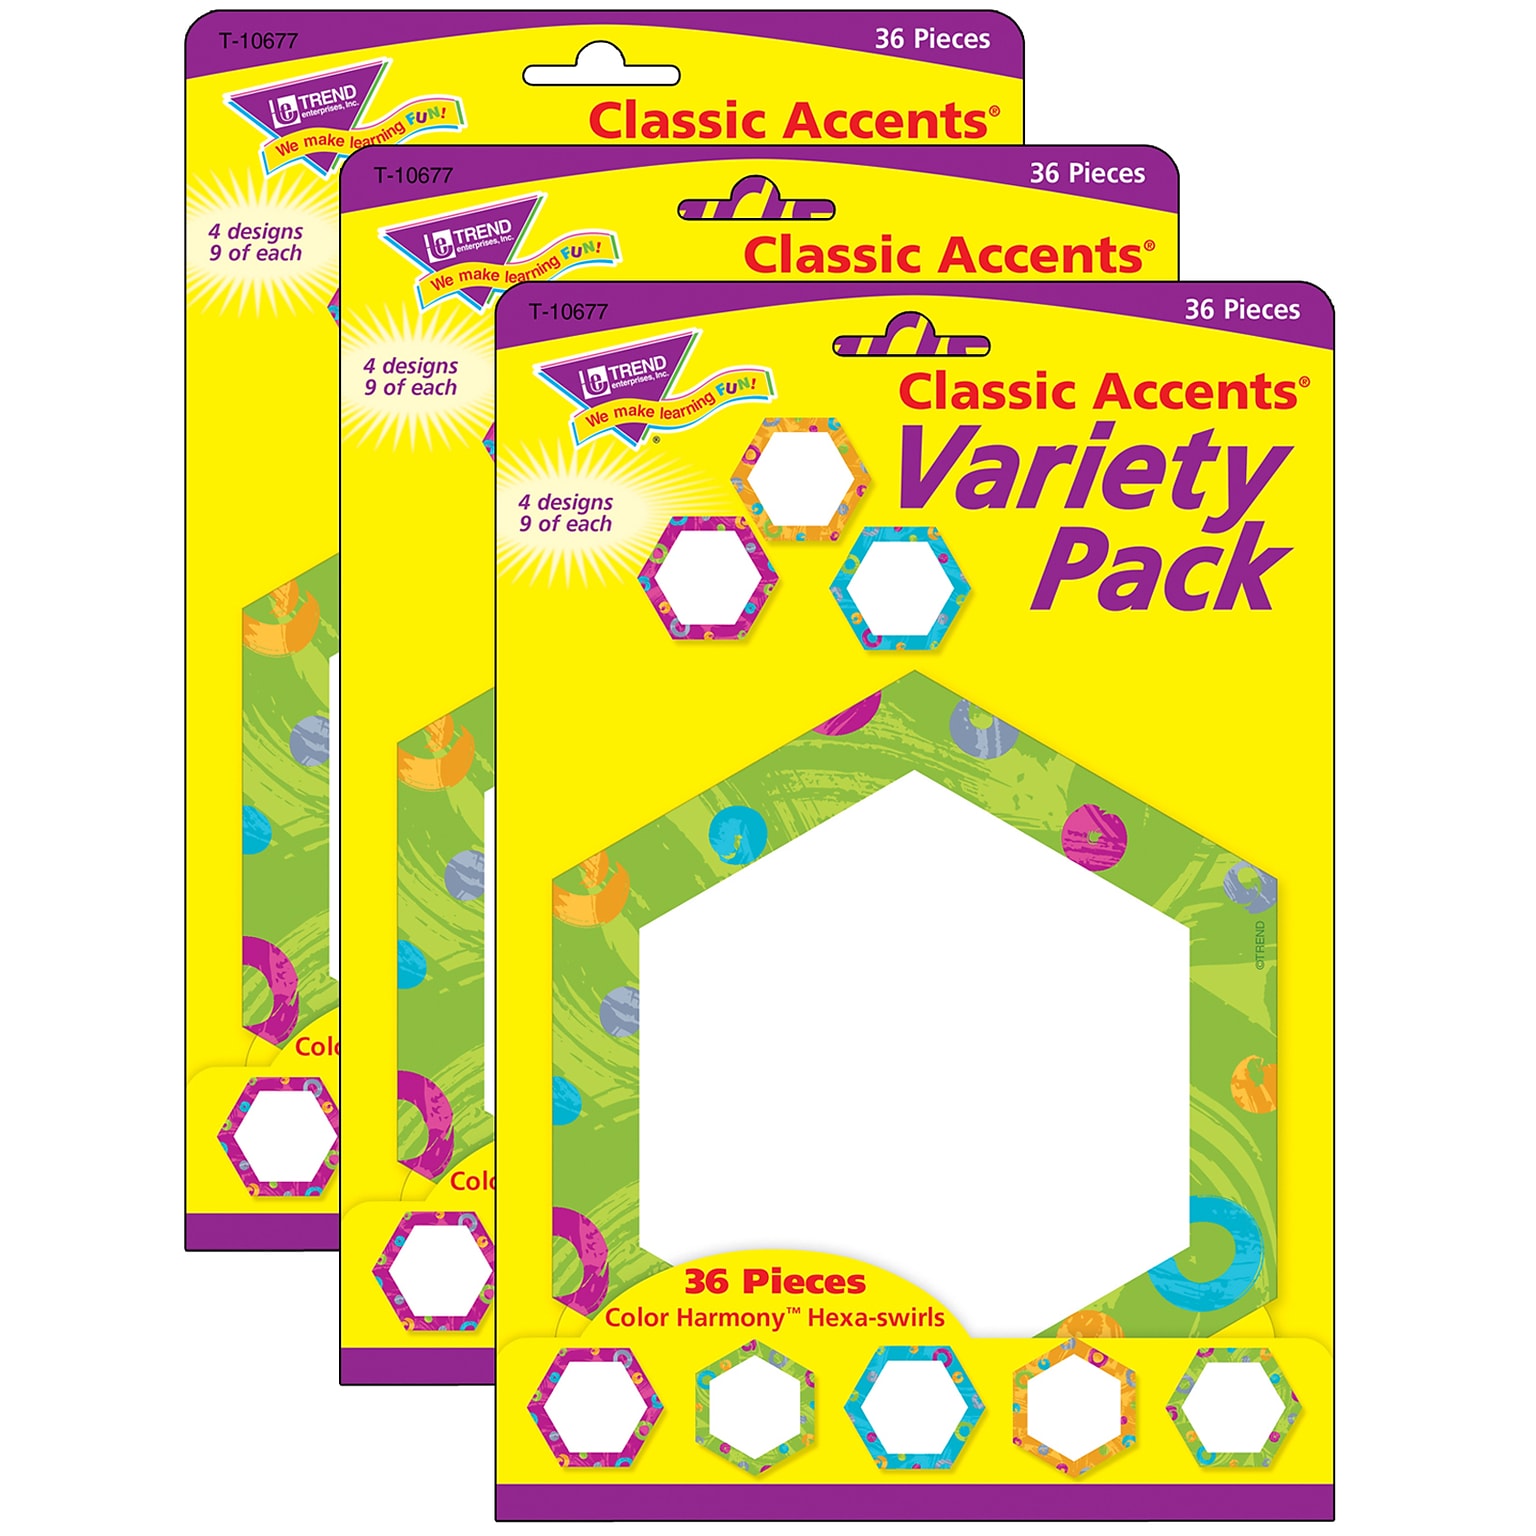 TREND Color Harmony™ Hexa-swirls Classic Accents Variety Pack, 36 Per Pack, 3 Packs (T-10677-3)